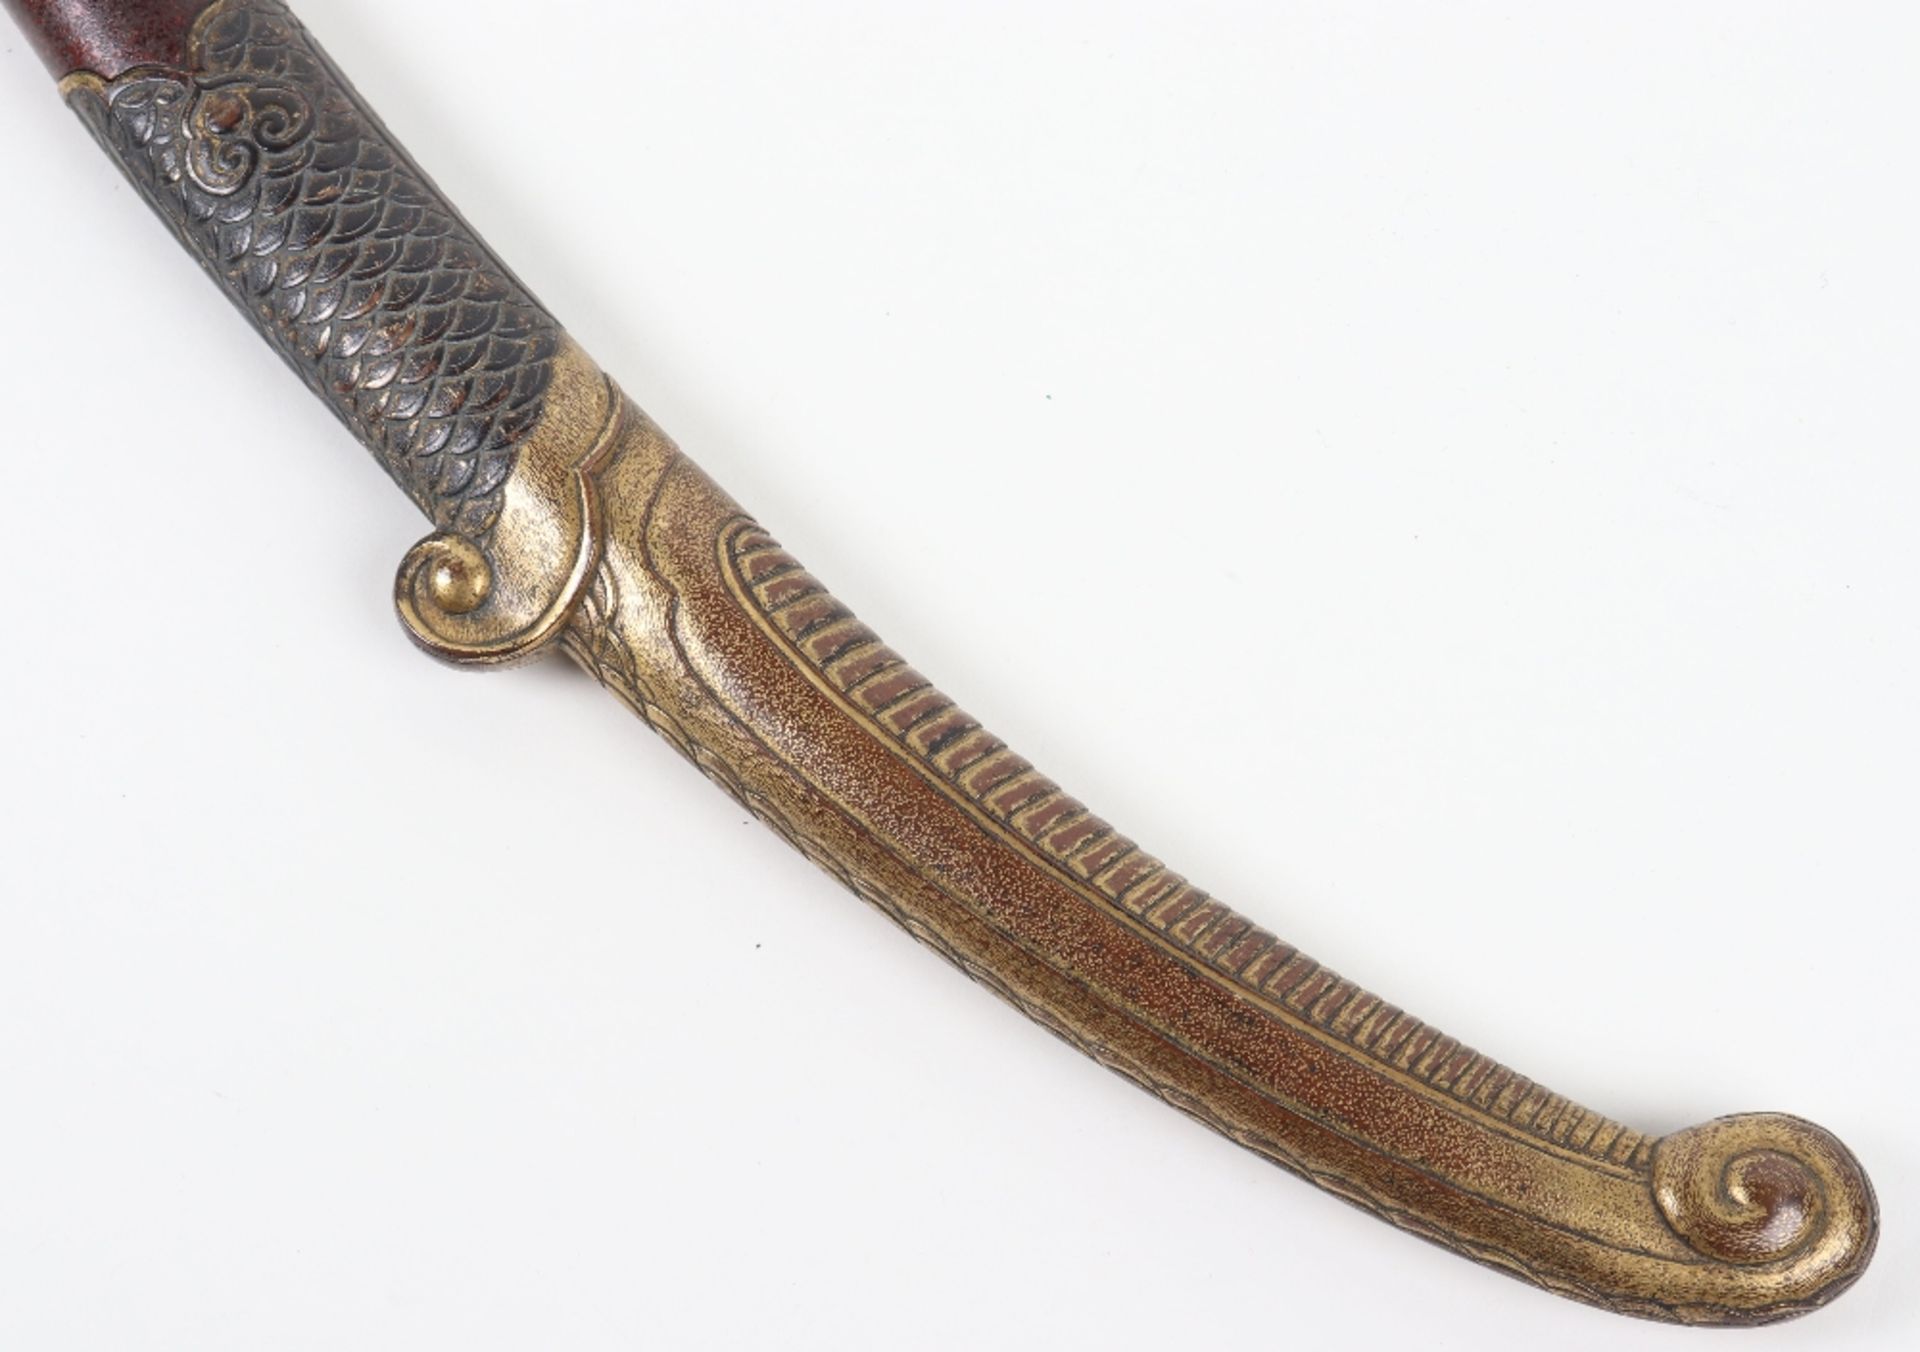 Composite Japanese Sword of Tachi Type - Image 18 of 25